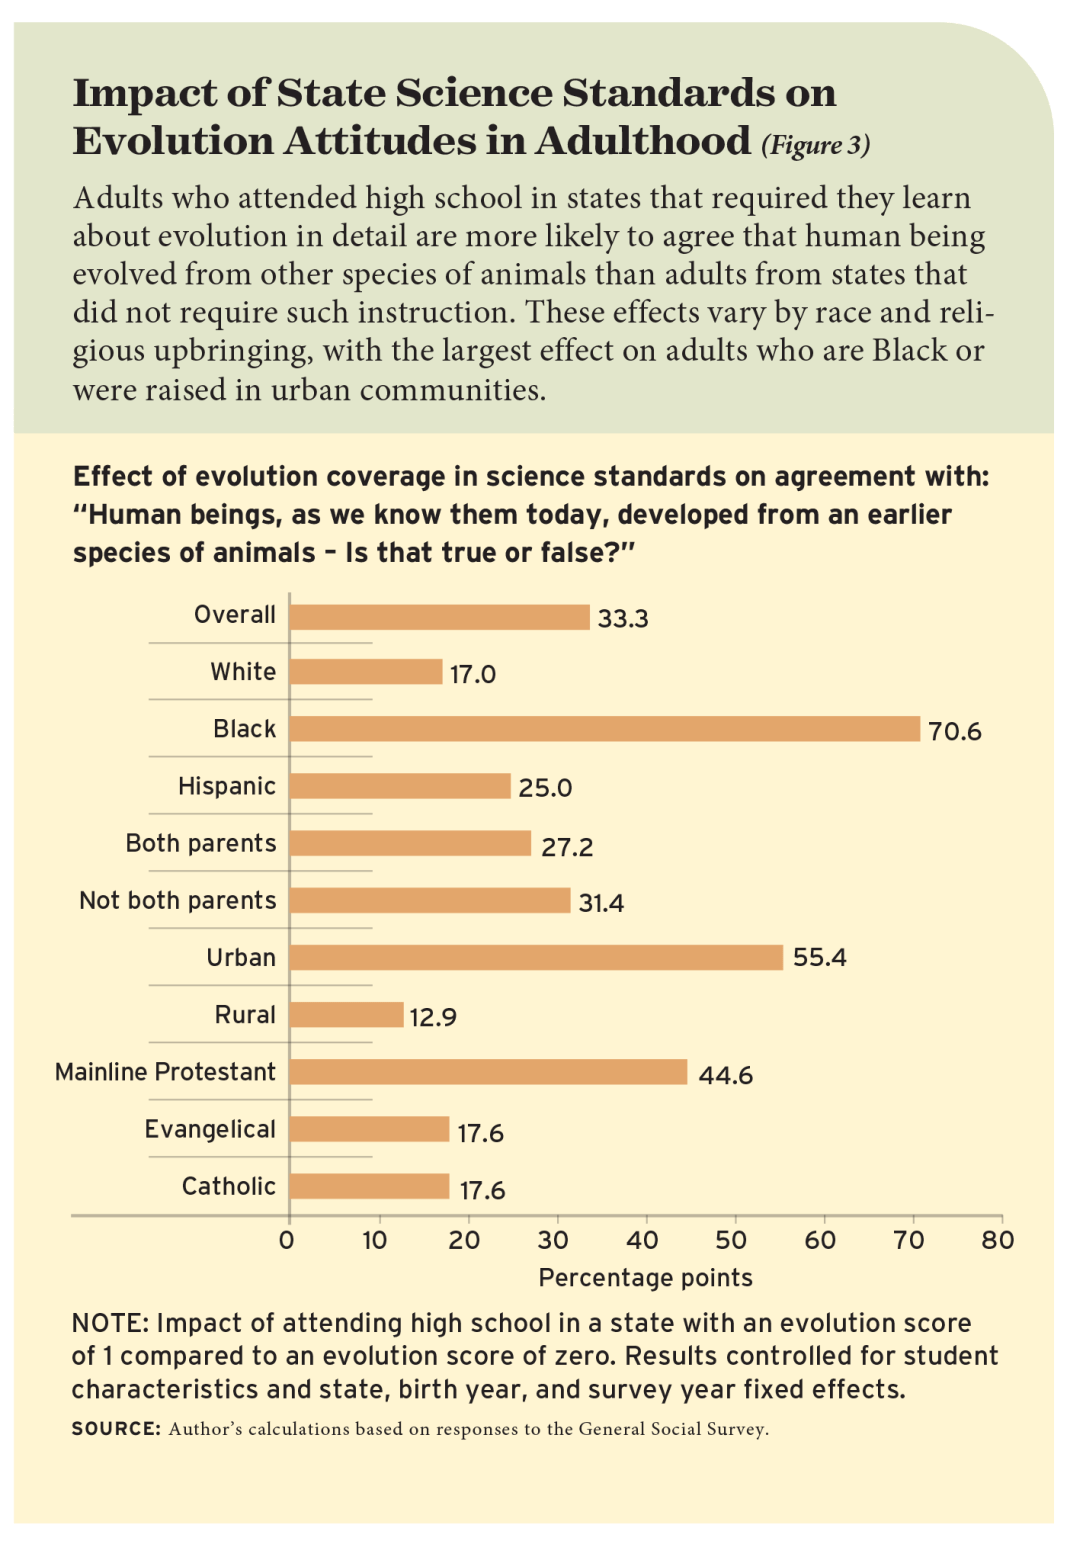 Impact of State Science Standards on Evolution Attitudes in Adulthood (Figure 3)